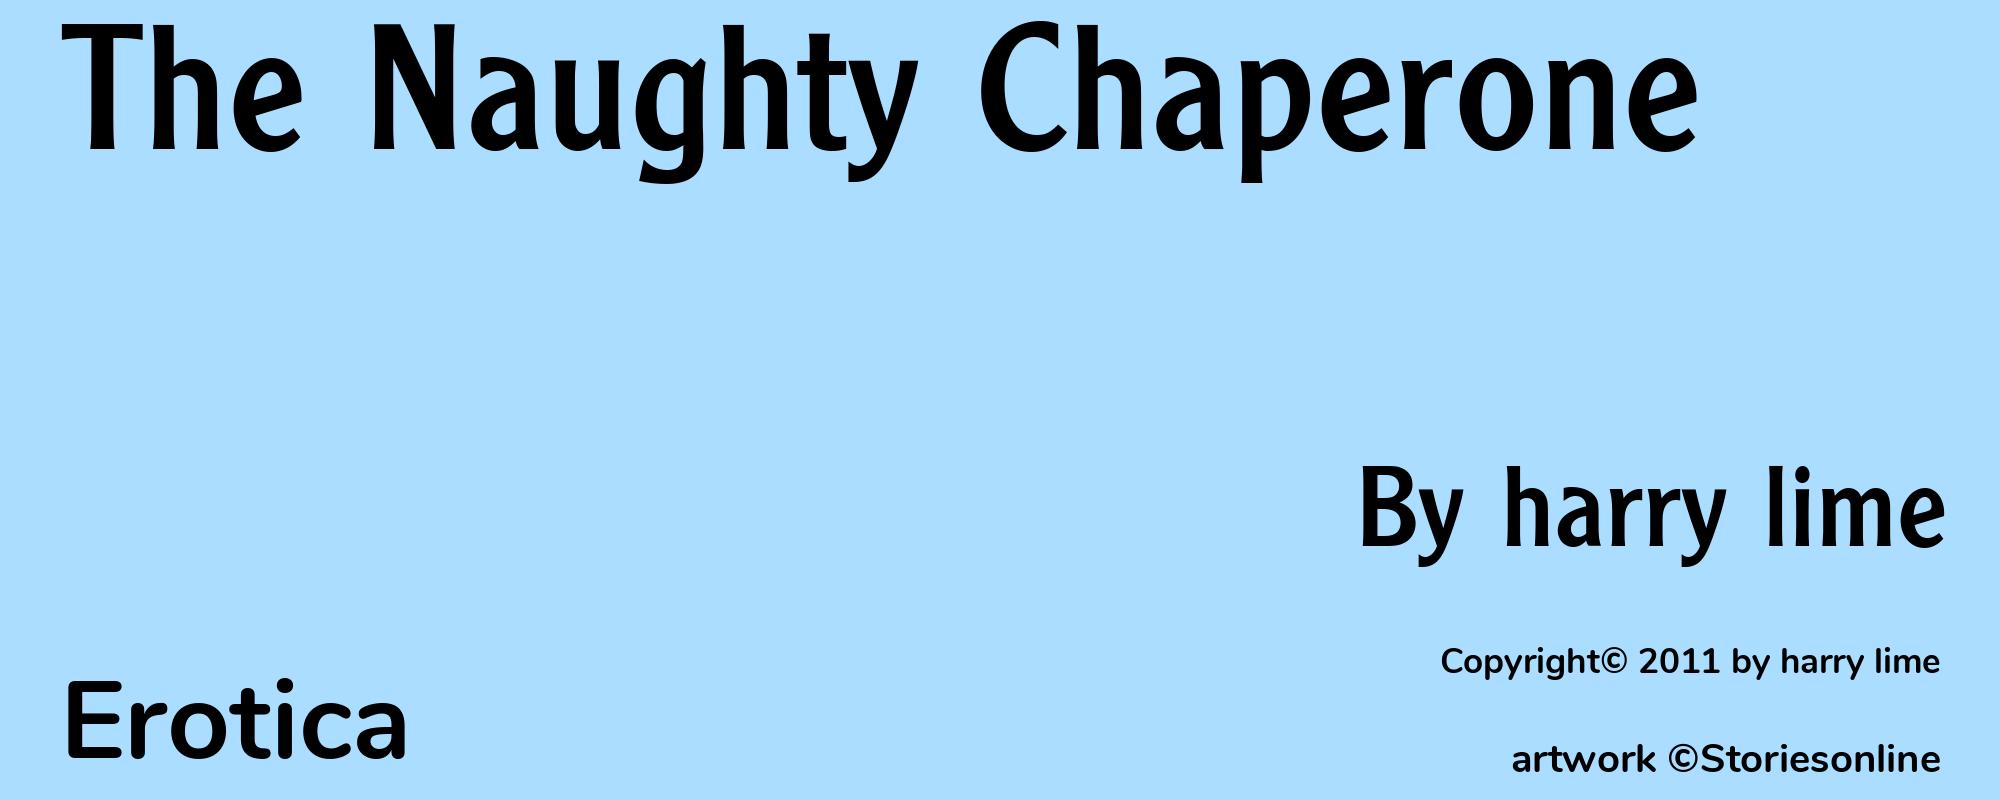 The Naughty Chaperone - Cover